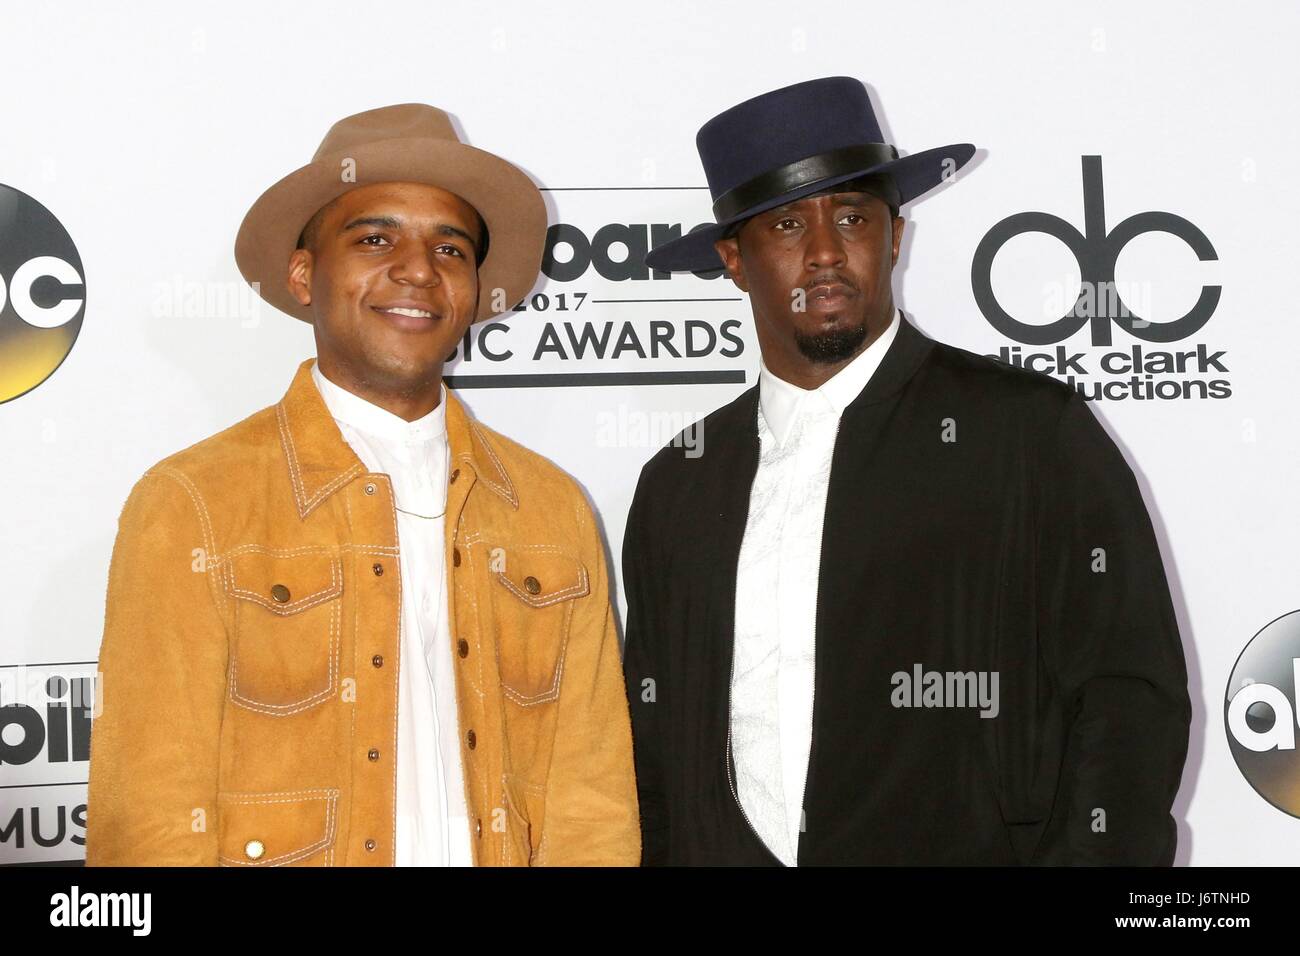 Las Vegas, NV, USA. 21st May, 2017. Christopher Jordan Wallace, Sean Combs in the press room for Billboard Music Awards 2017 - Press Room, T-Mobile Arena, Las Vegas, NV May 21, 2017. Credit: Priscilla Grant/Everett Collection/Alamy Live News Stock Photo